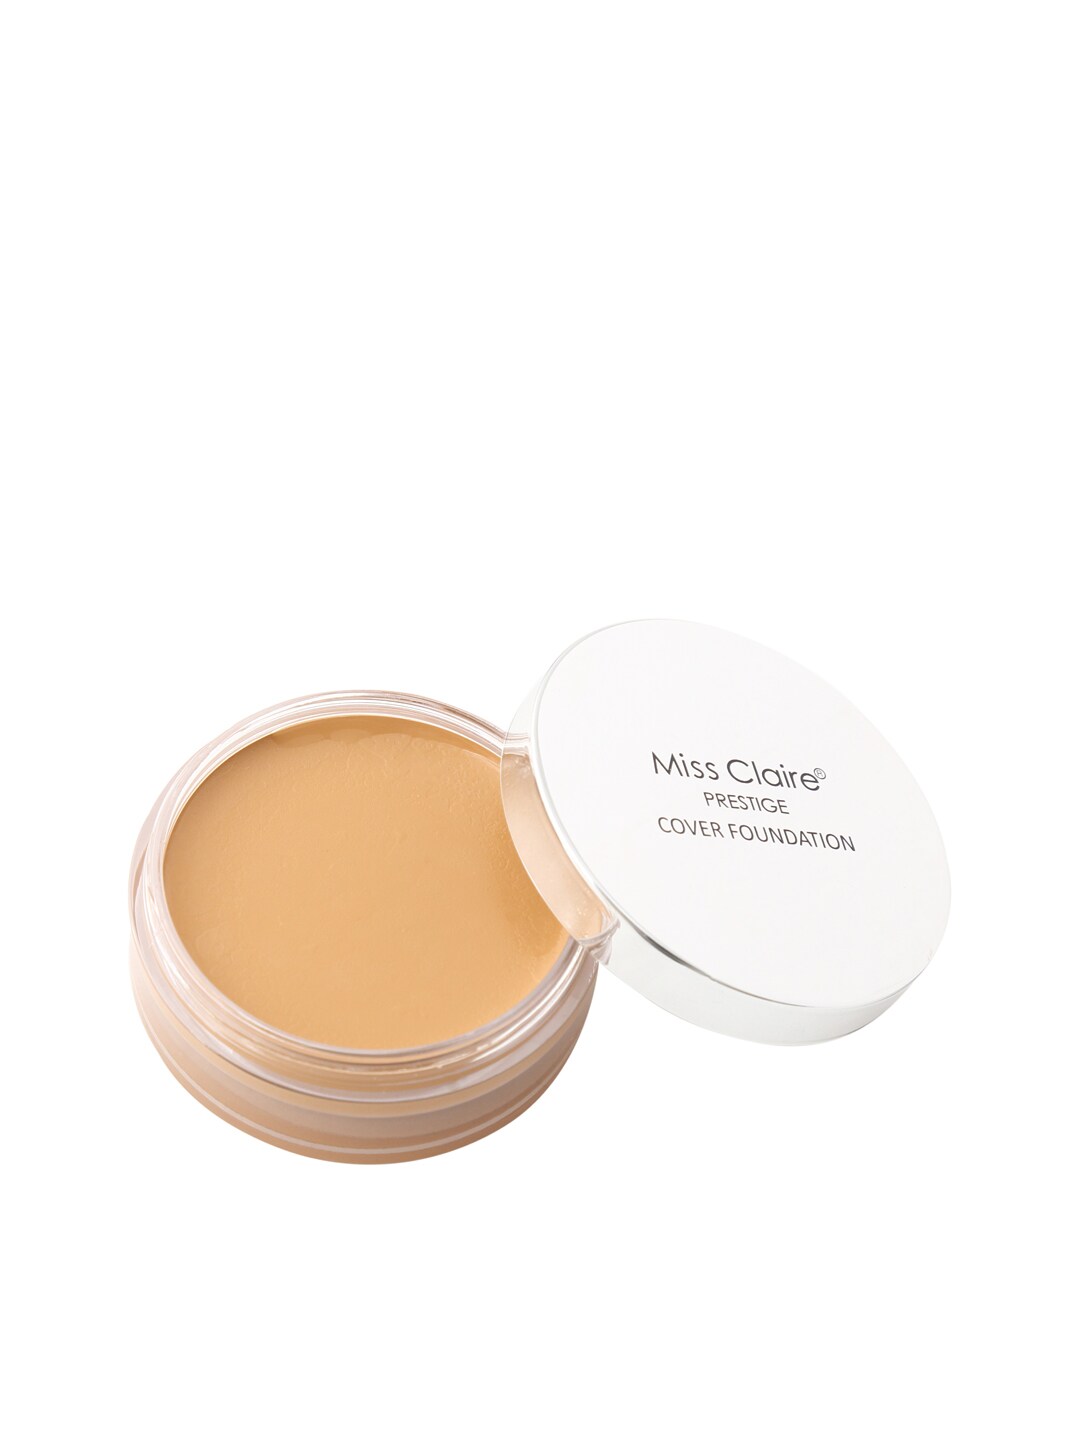 Miss Claire 626B Rose Beige Prestige Cover Foundation 20g Price in India